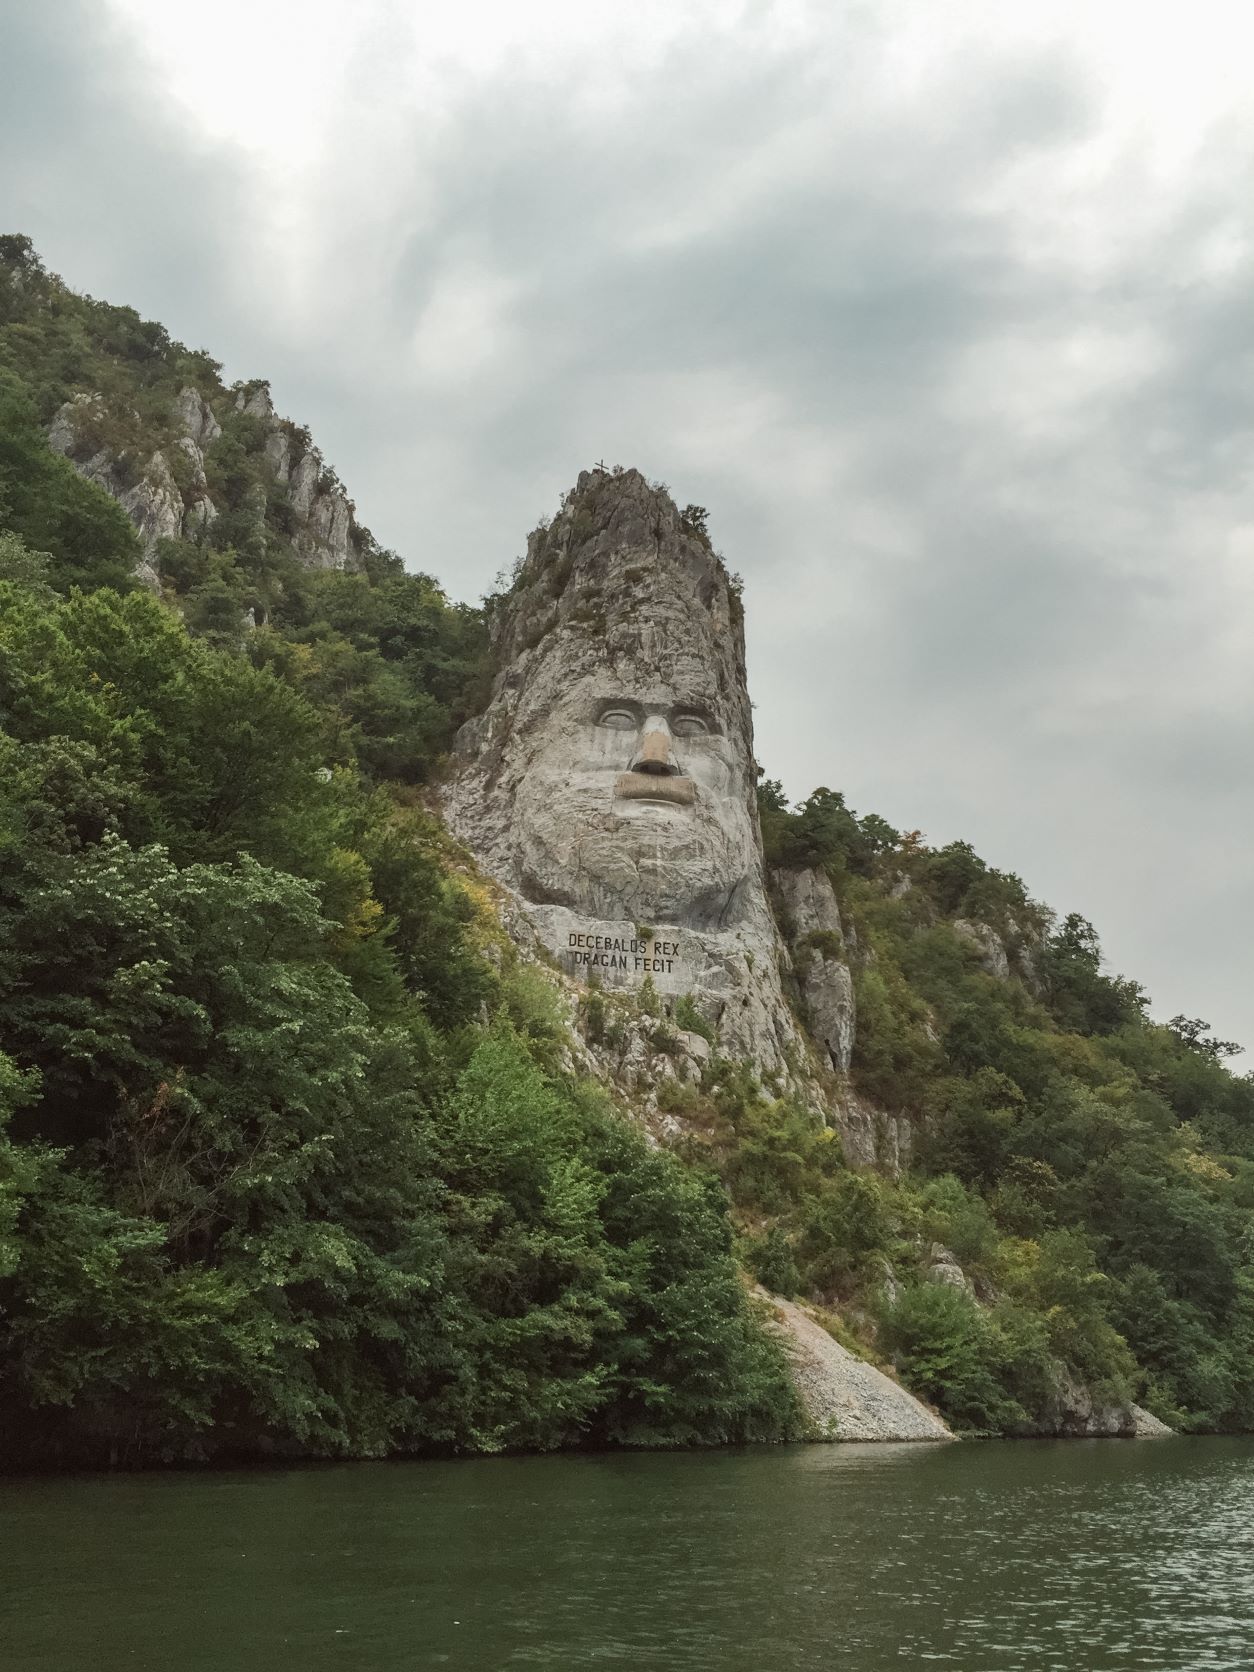 The statue of King Decebalus